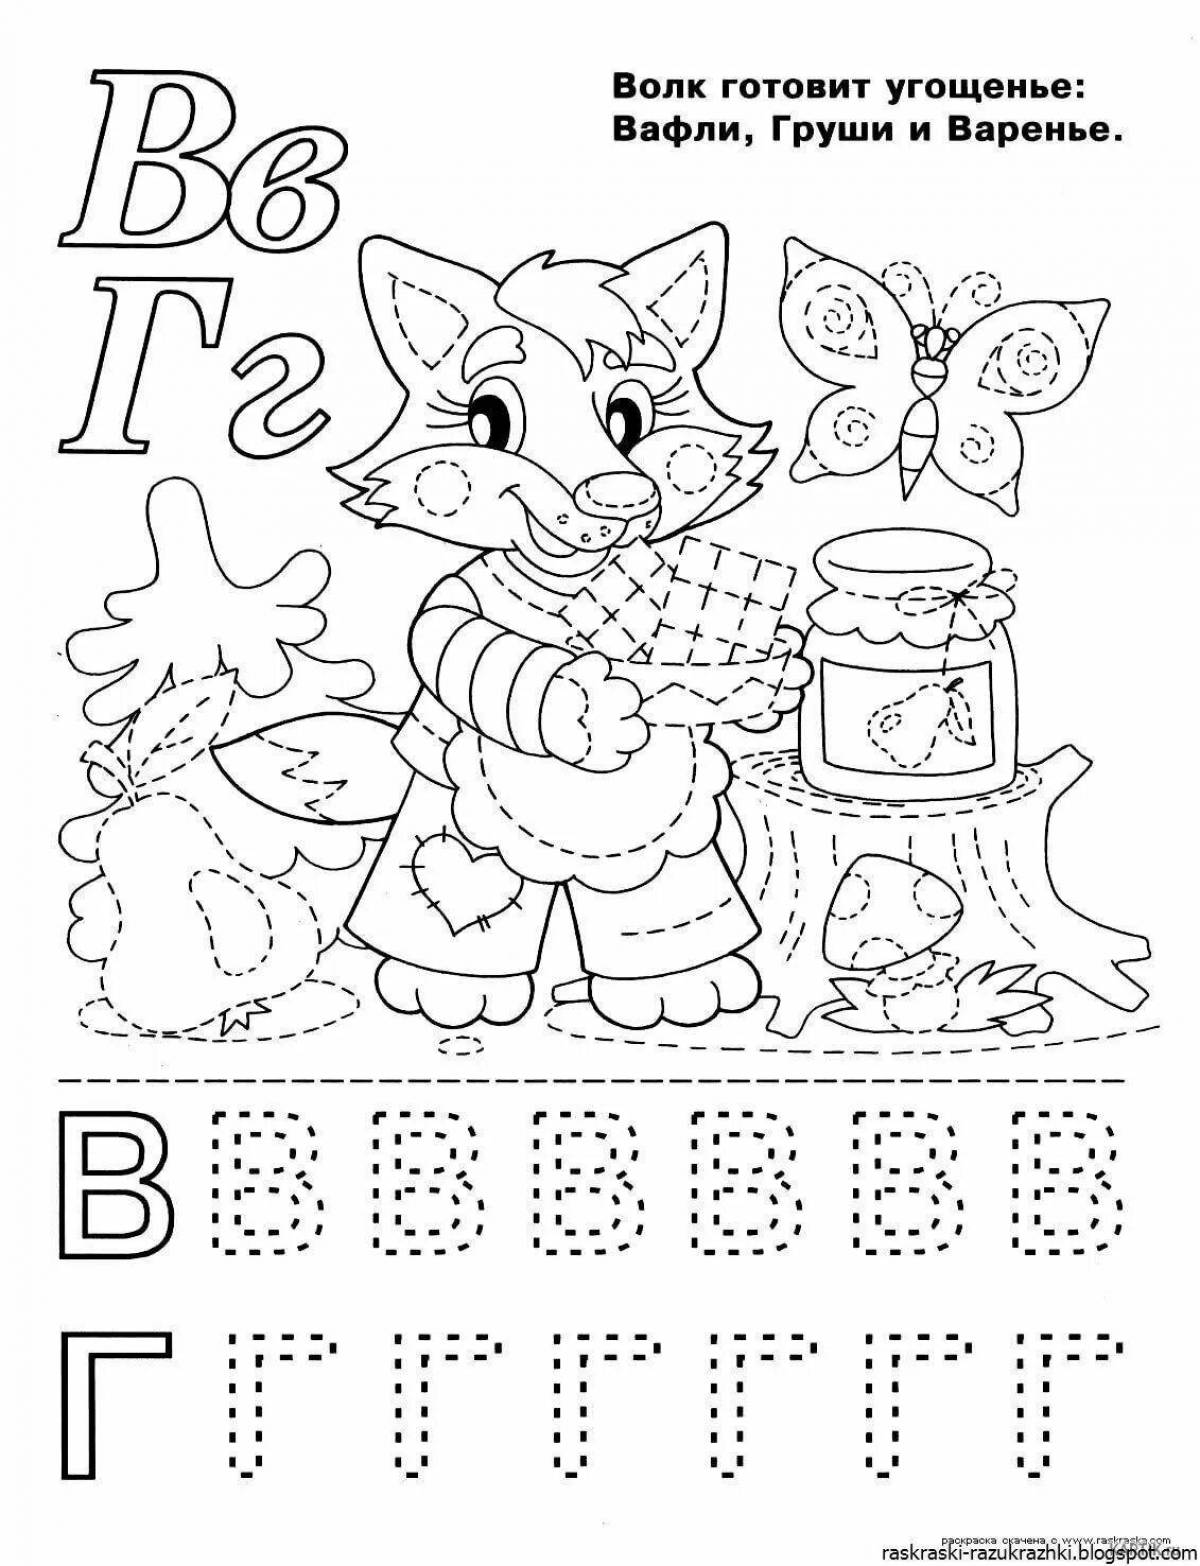 Adorable letter coloring book for 5-6 year olds